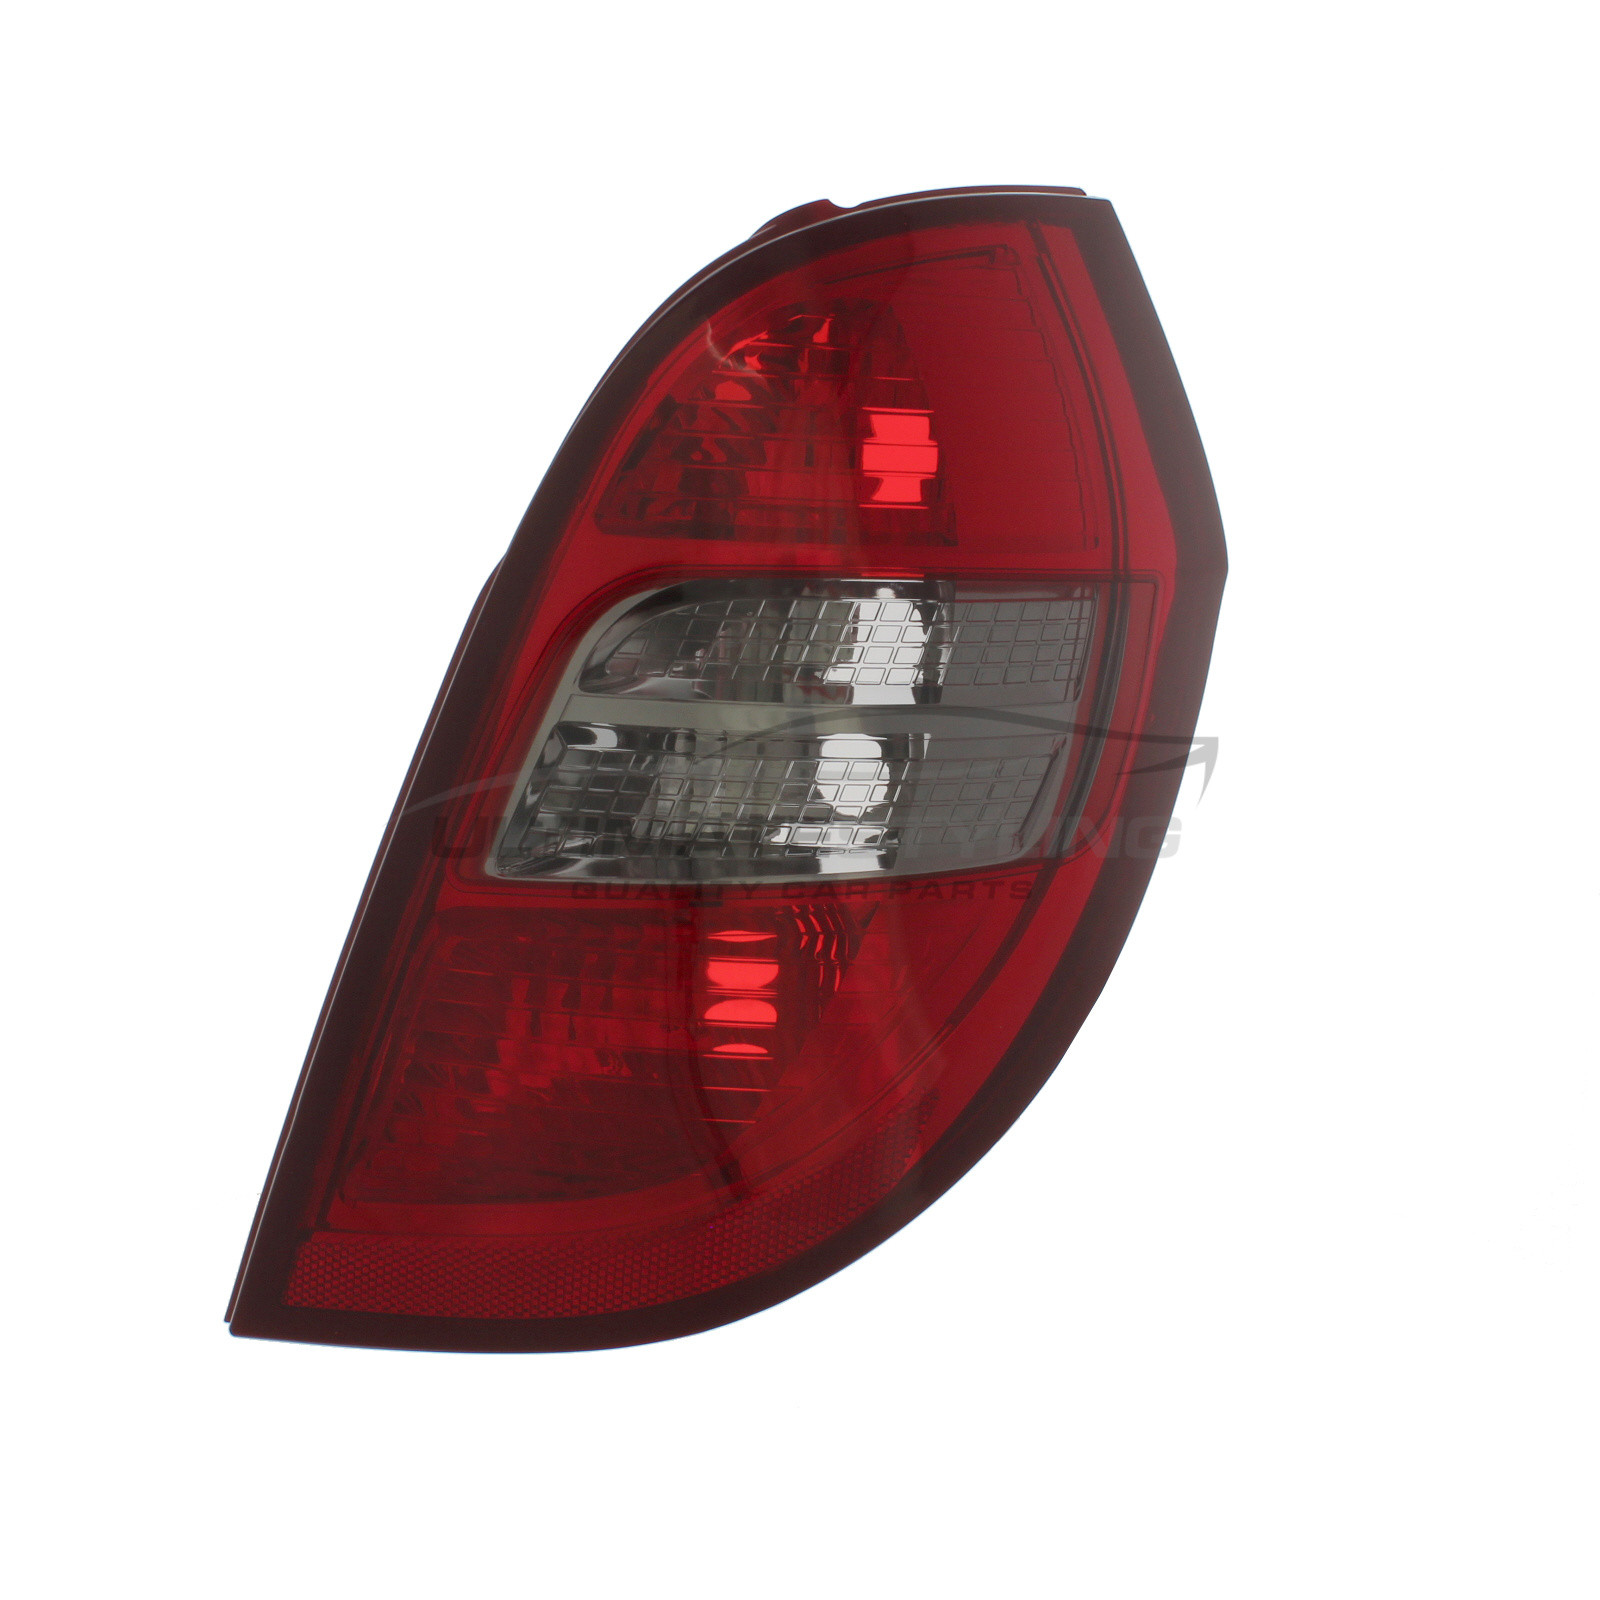 Mercedes Benz A Class 2008-2012 Non-LED with Smoked Indicator Rear Light / Tail Light Excluding Bulb Holder Drivers Side (RH)